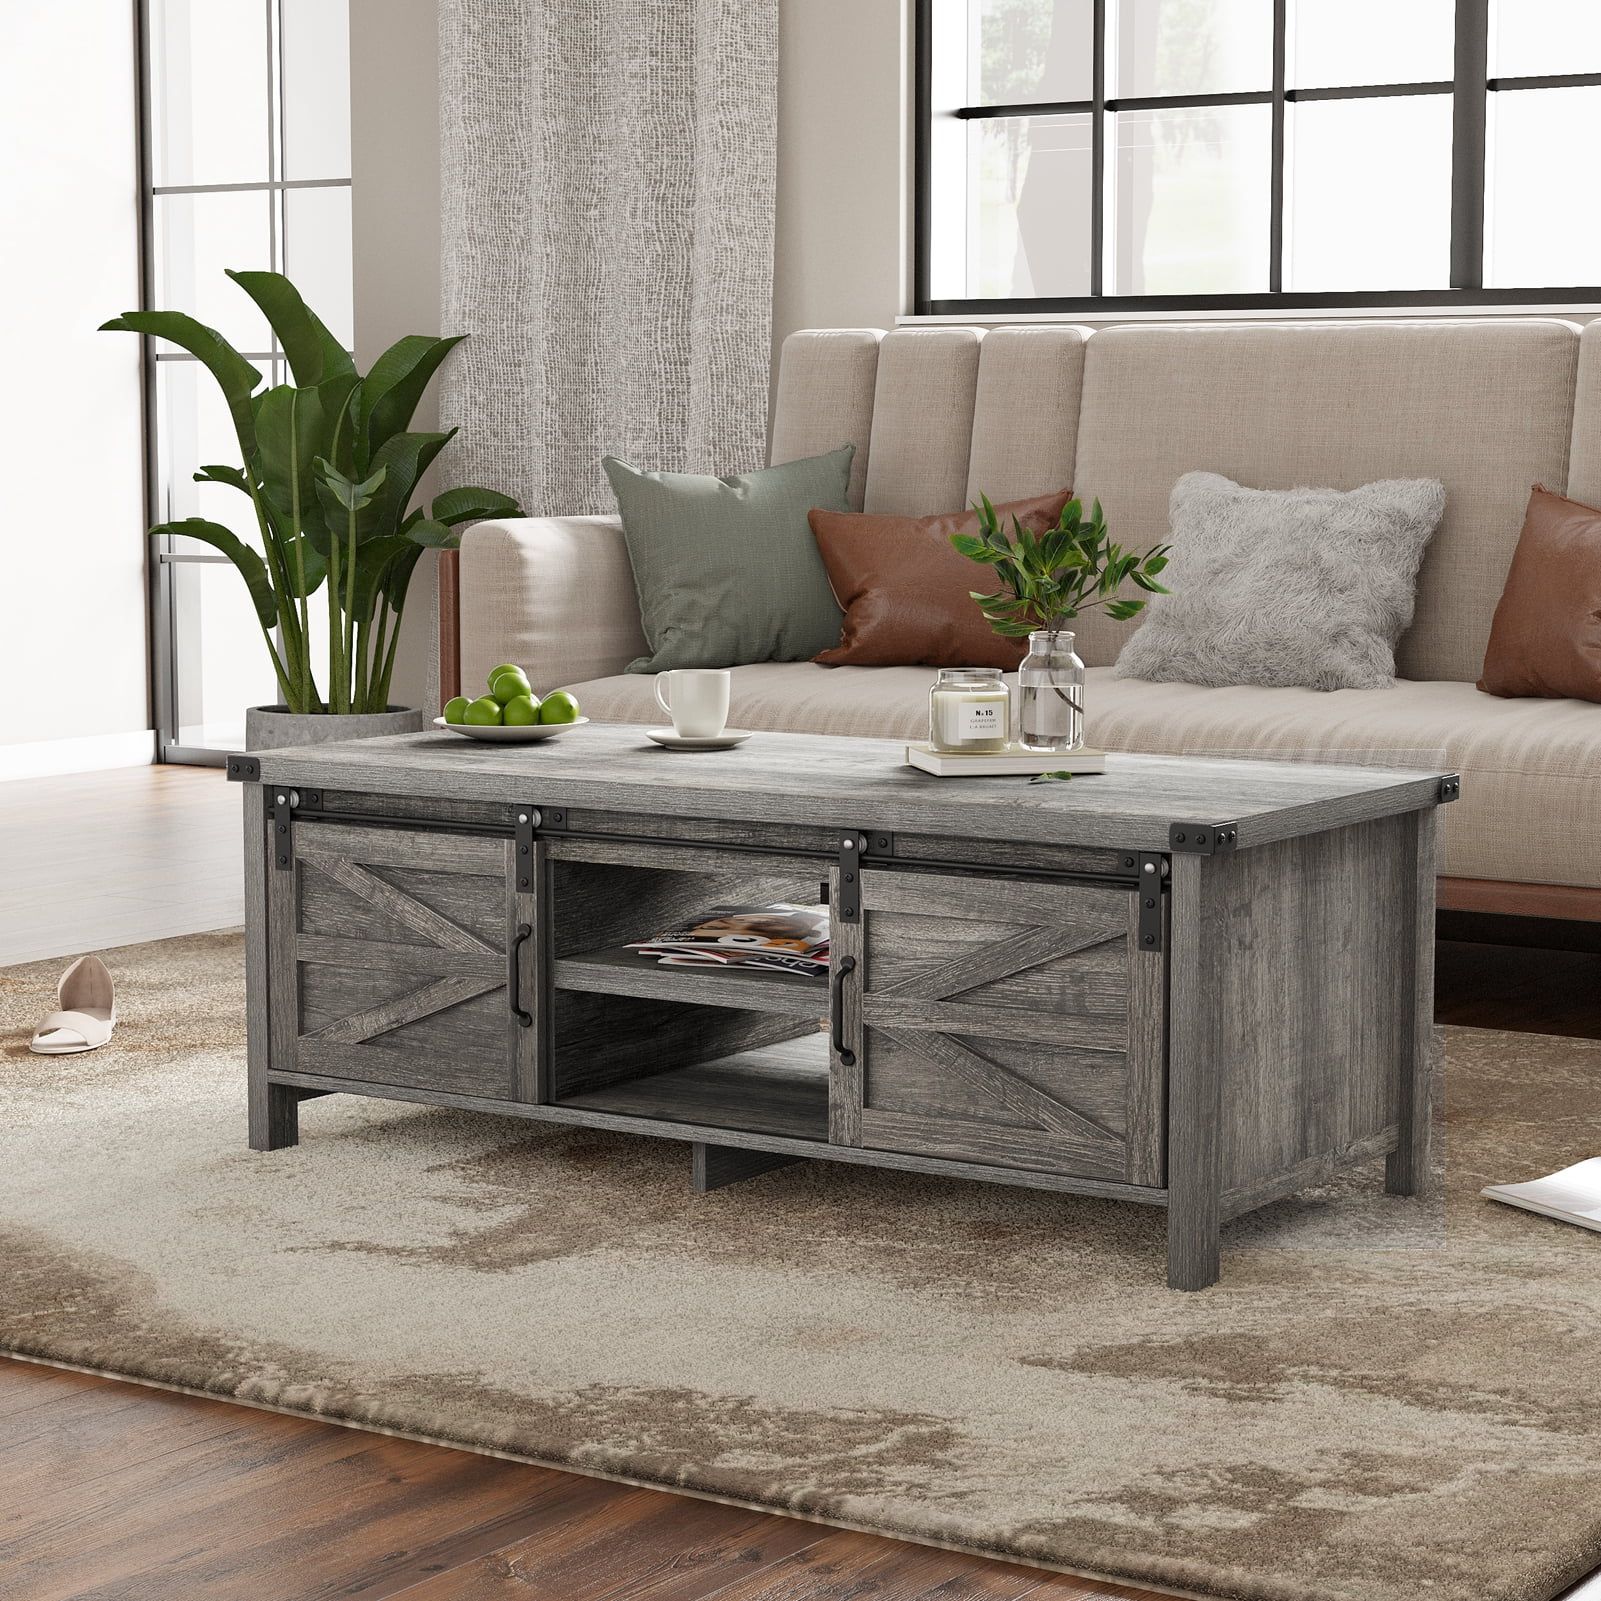 Yaoping 48" Modern Farmhouse Coffee Table With Adjustable Storage Cabinets  Shelves, Modern Coffee Table For Living Room With Sliding Barn Door –  Walmart Intended For Coffee Tables With Sliding Barn Doors (View 7 of 15)